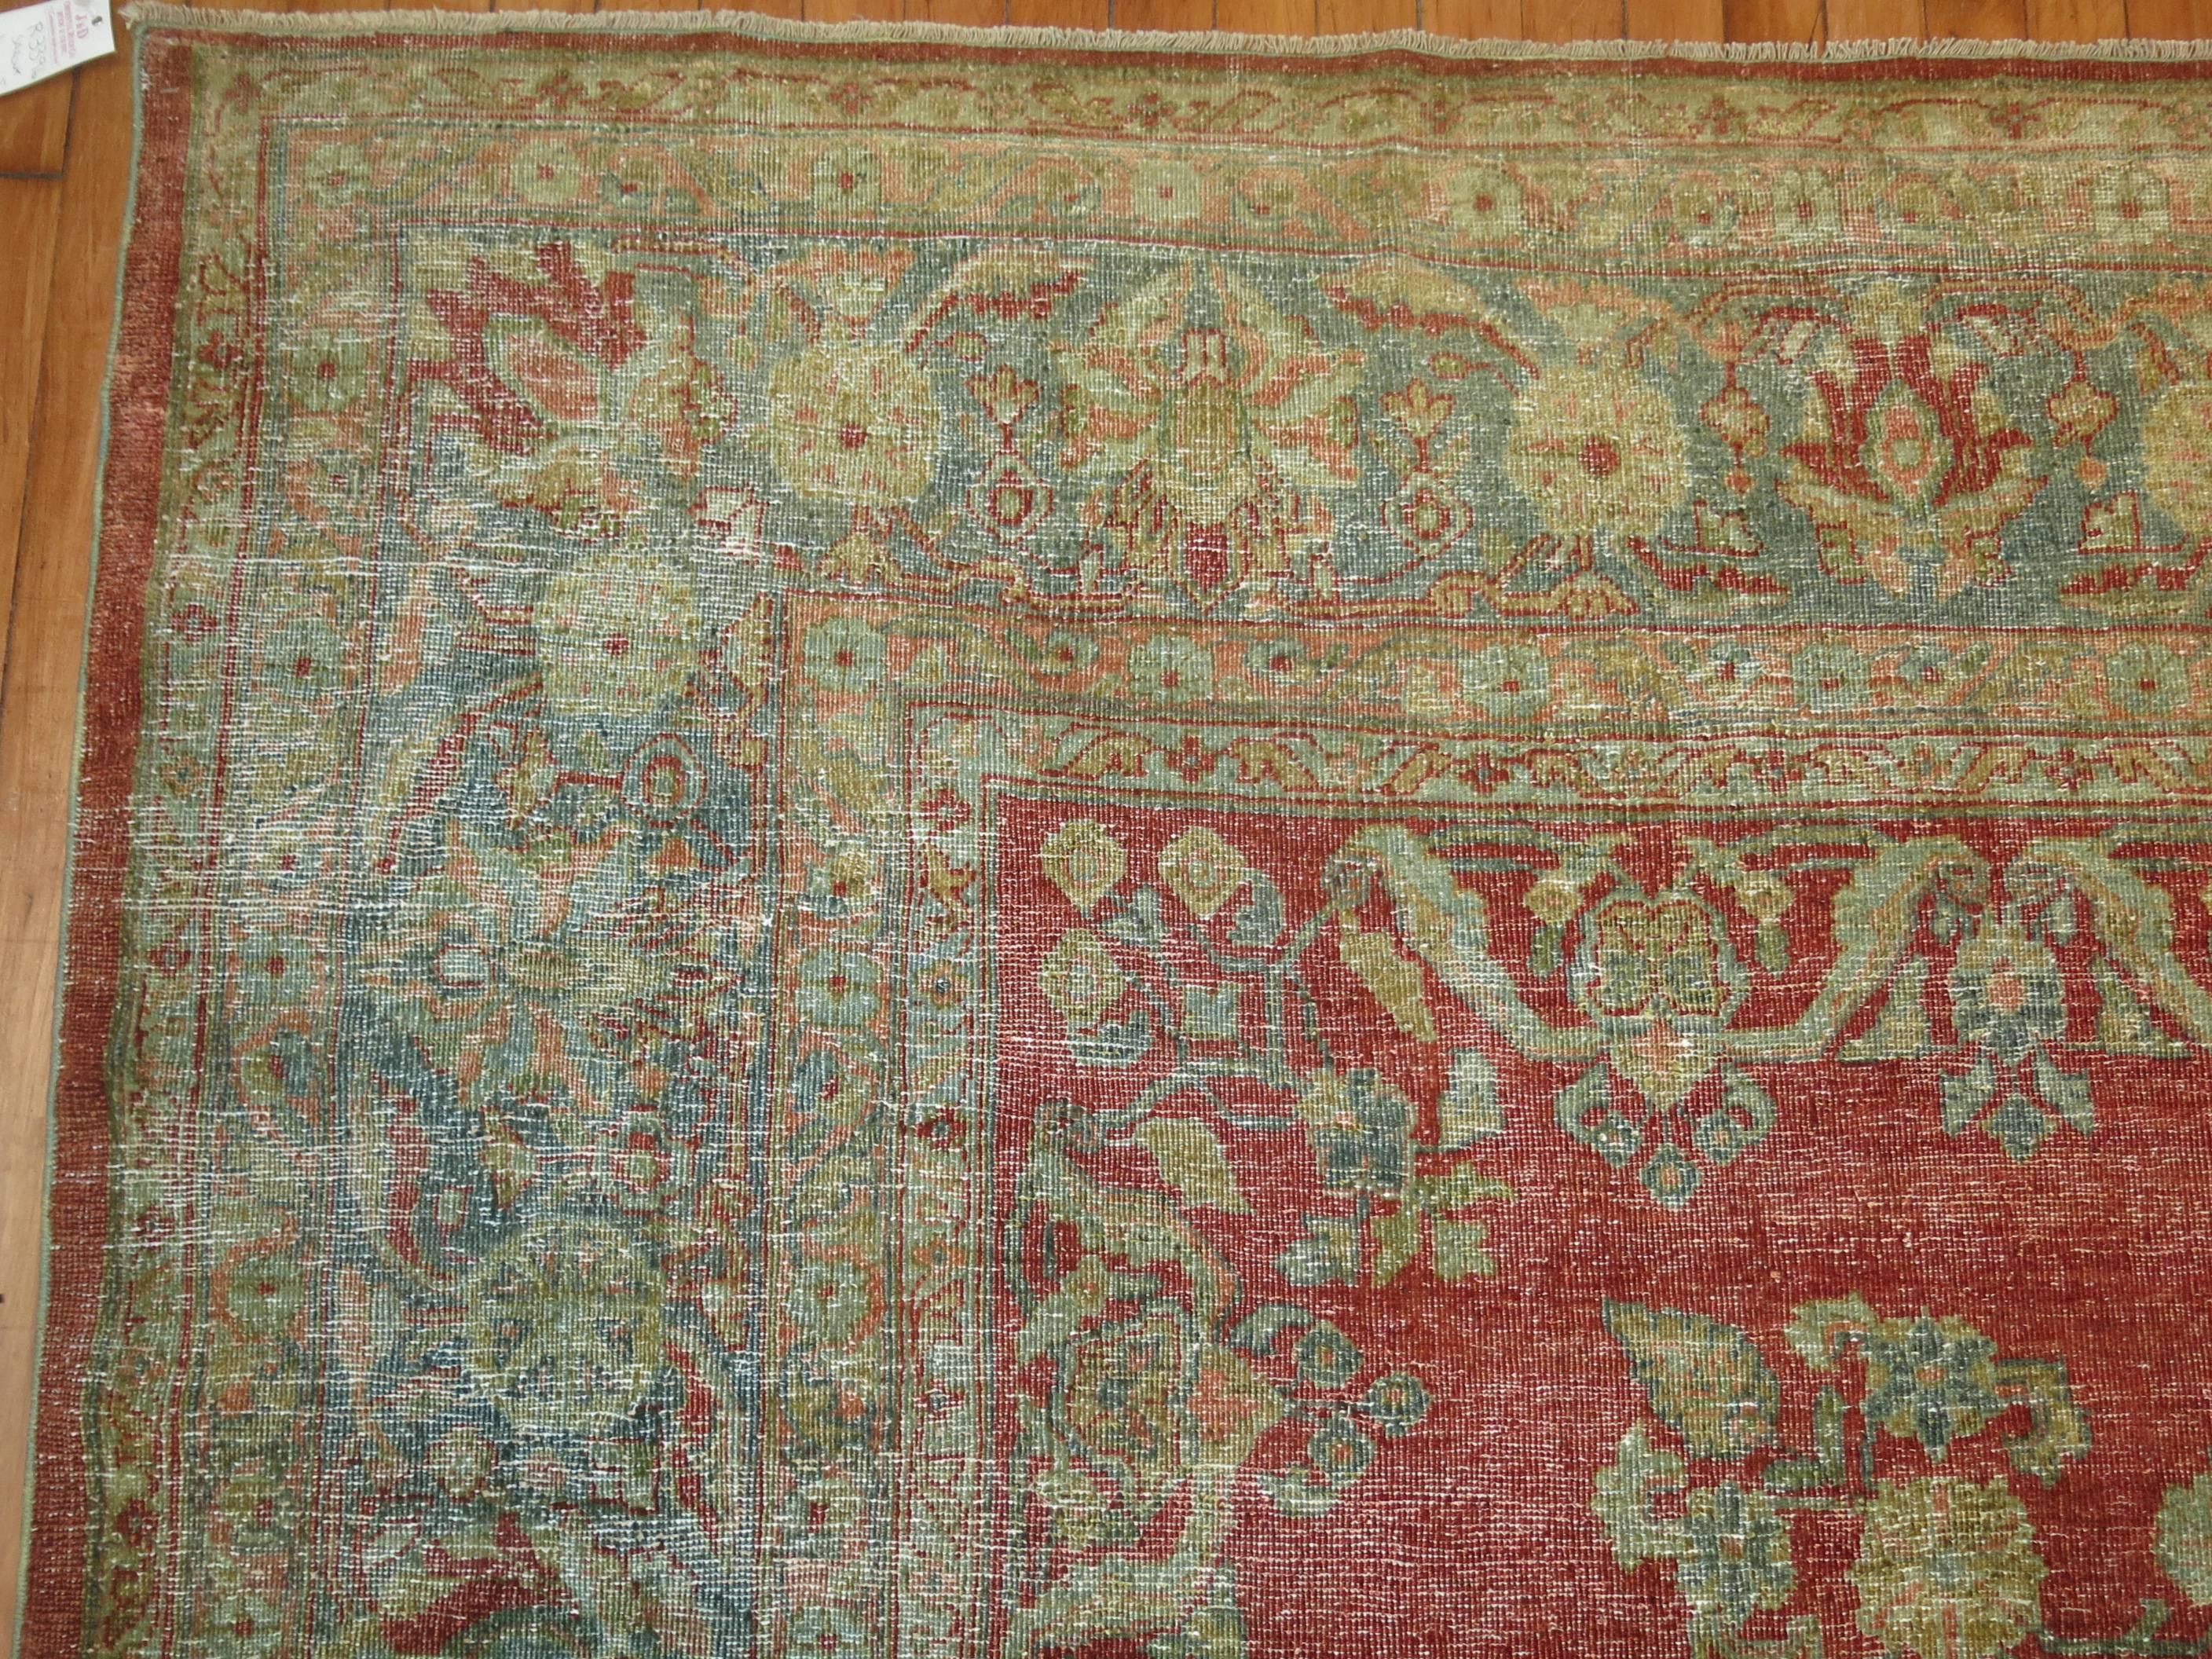 Decorative Persian Sarouk Carpet In Excellent Condition For Sale In New York, NY